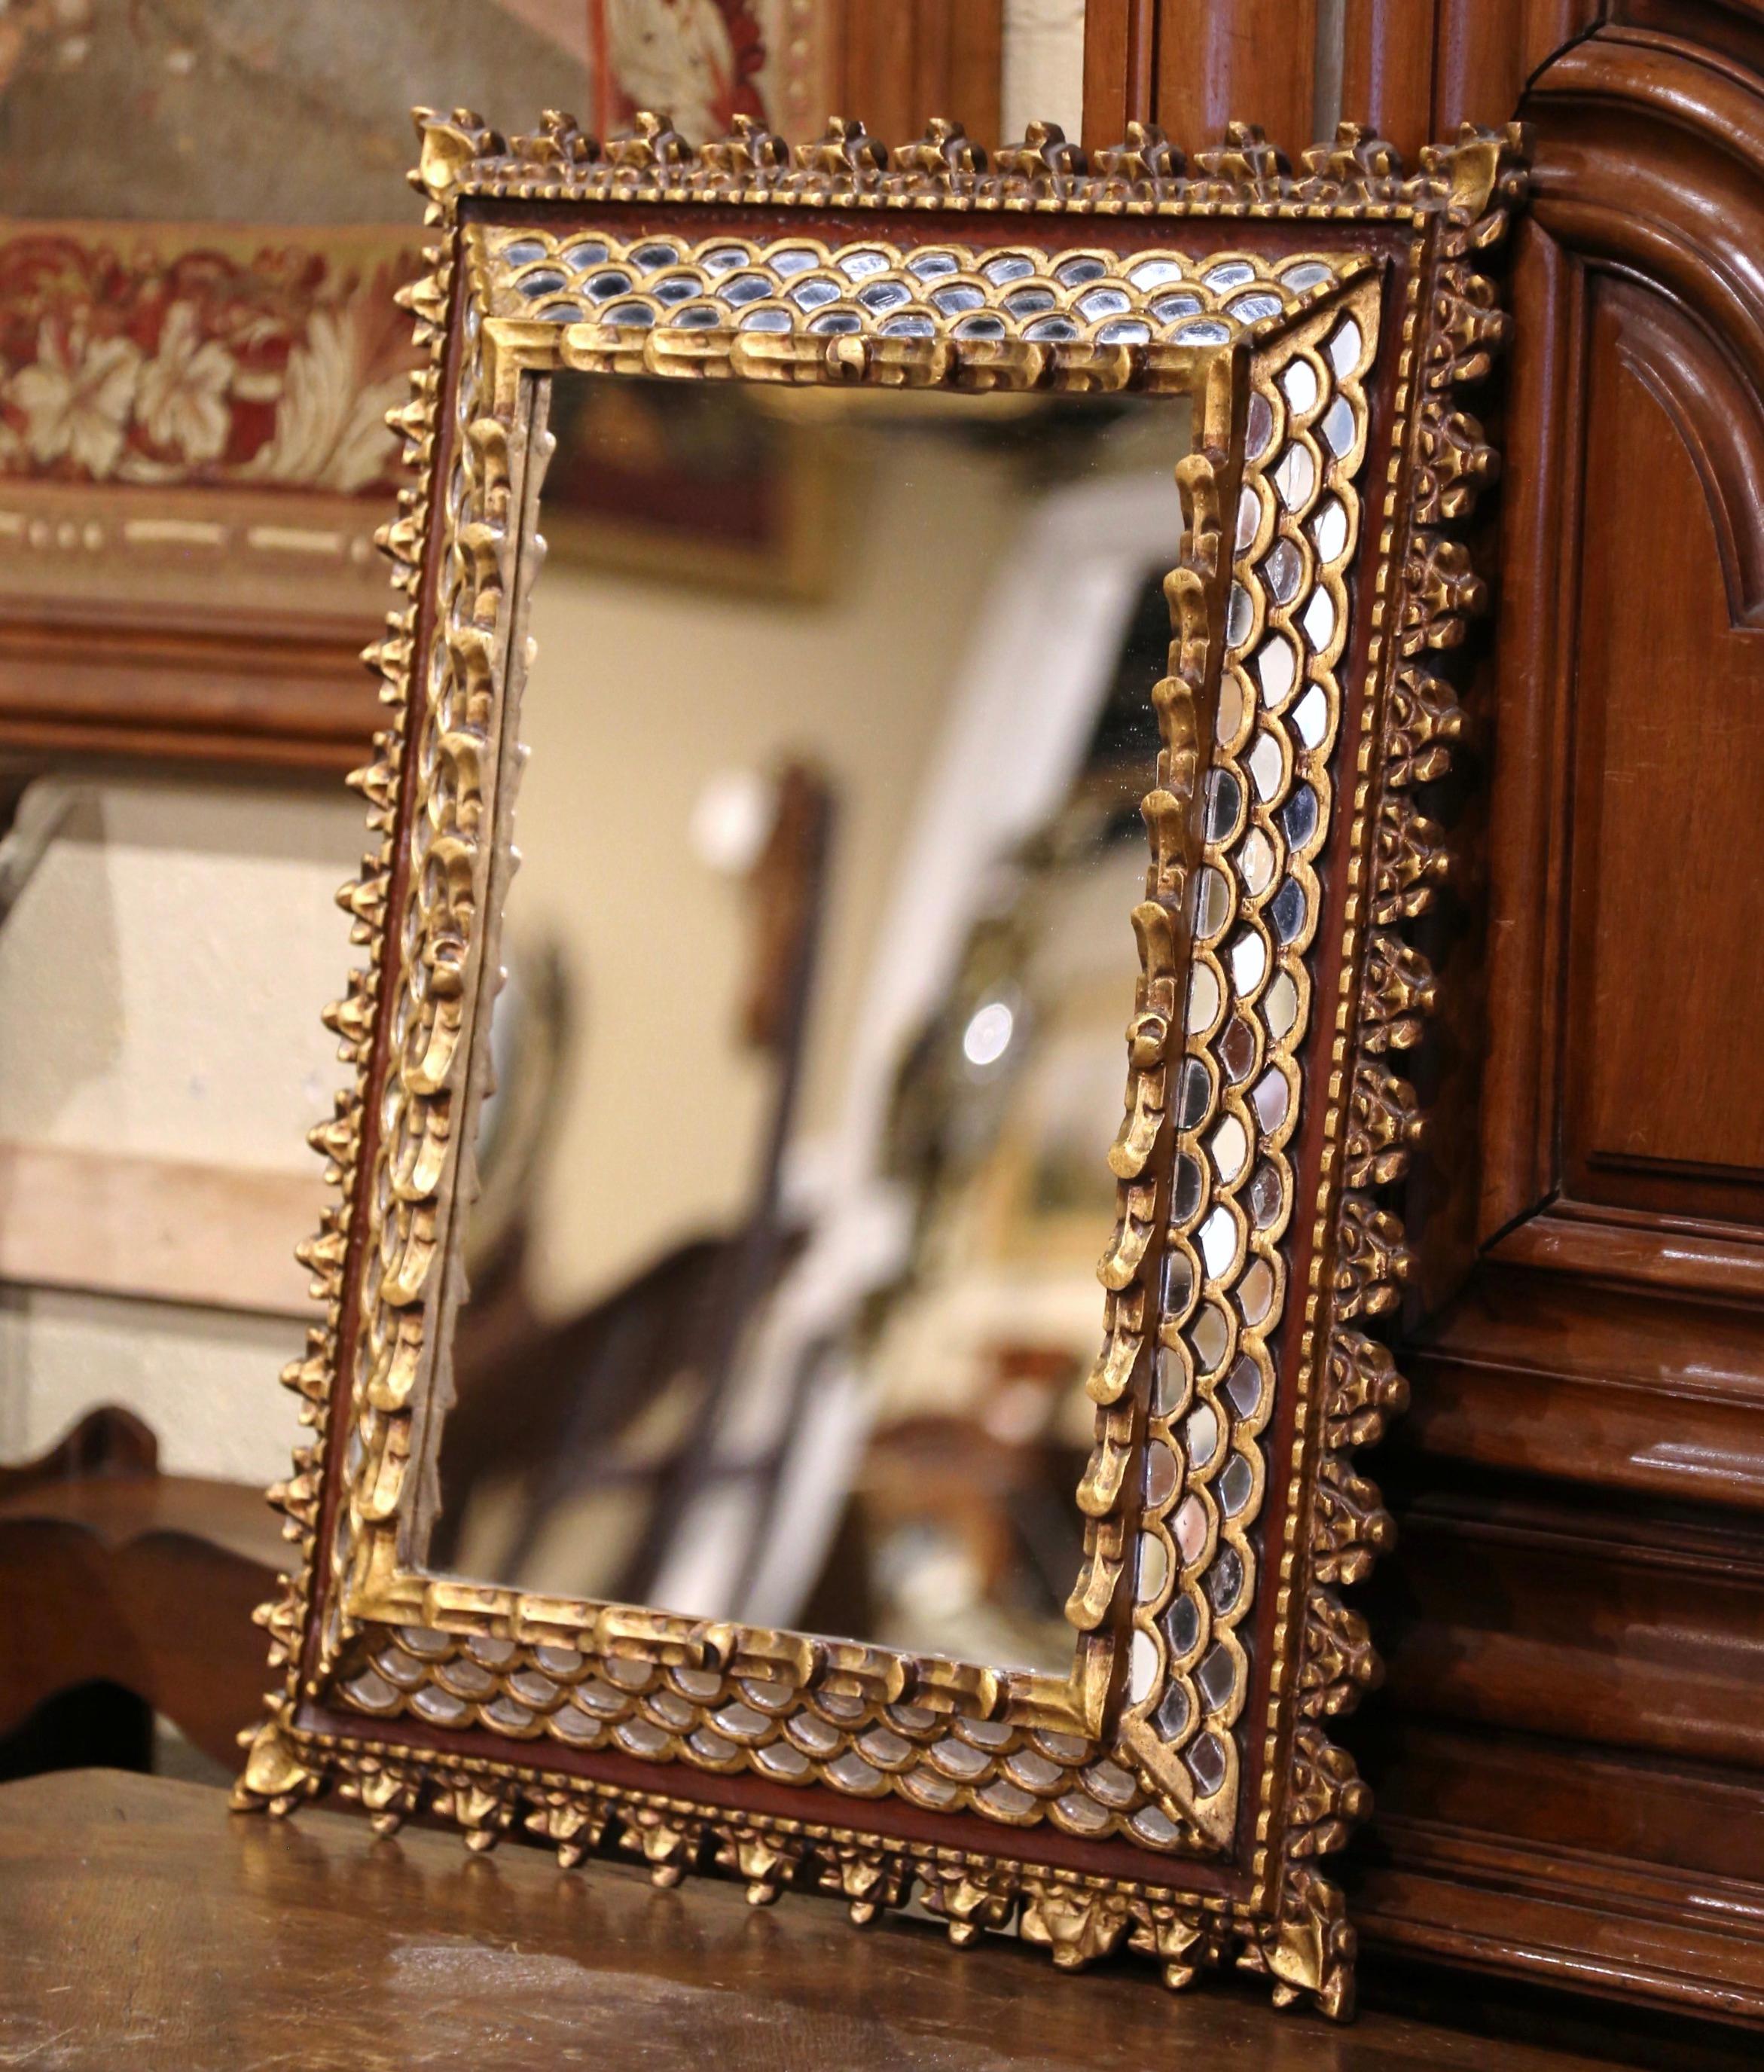 This elegant vintage sunburst mirror was crafted in France, circa 1960. Rectangular in shape and decorated with carved scalloped edges around the frieze frame, the antique wall mirror features a raised center mercury glass set inside; the four sides